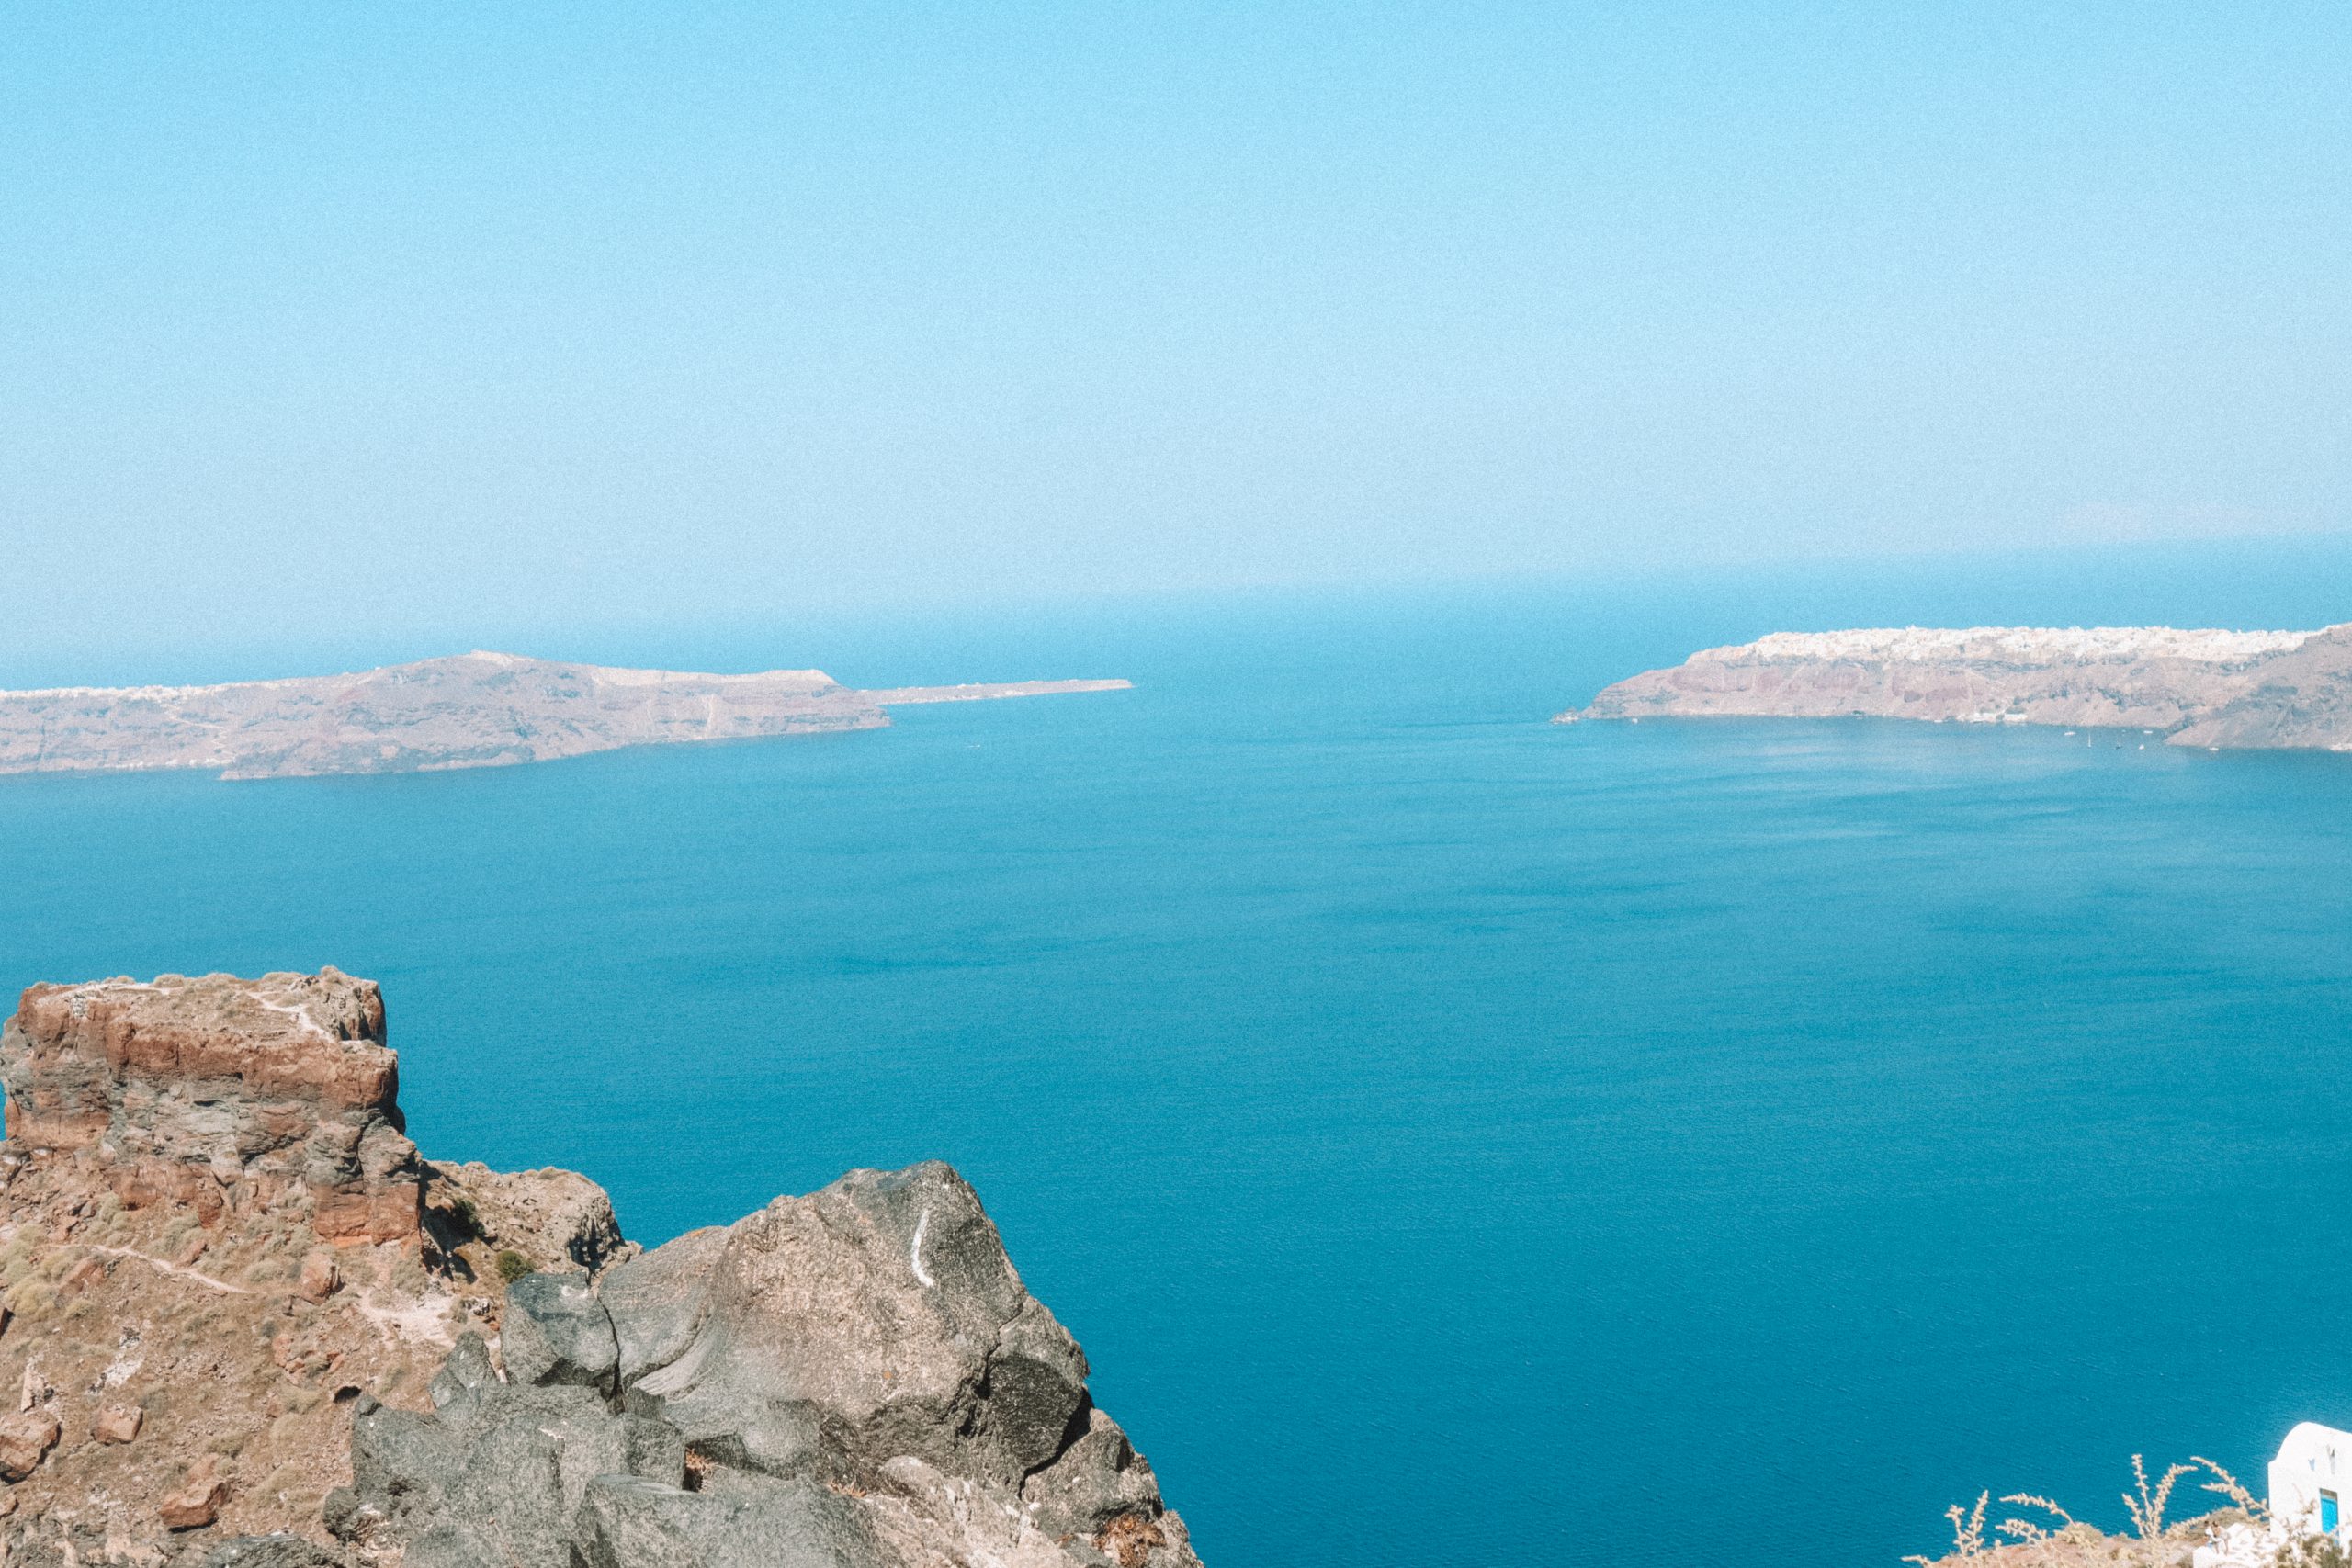 A view from Skaros Rock in Imerovigli